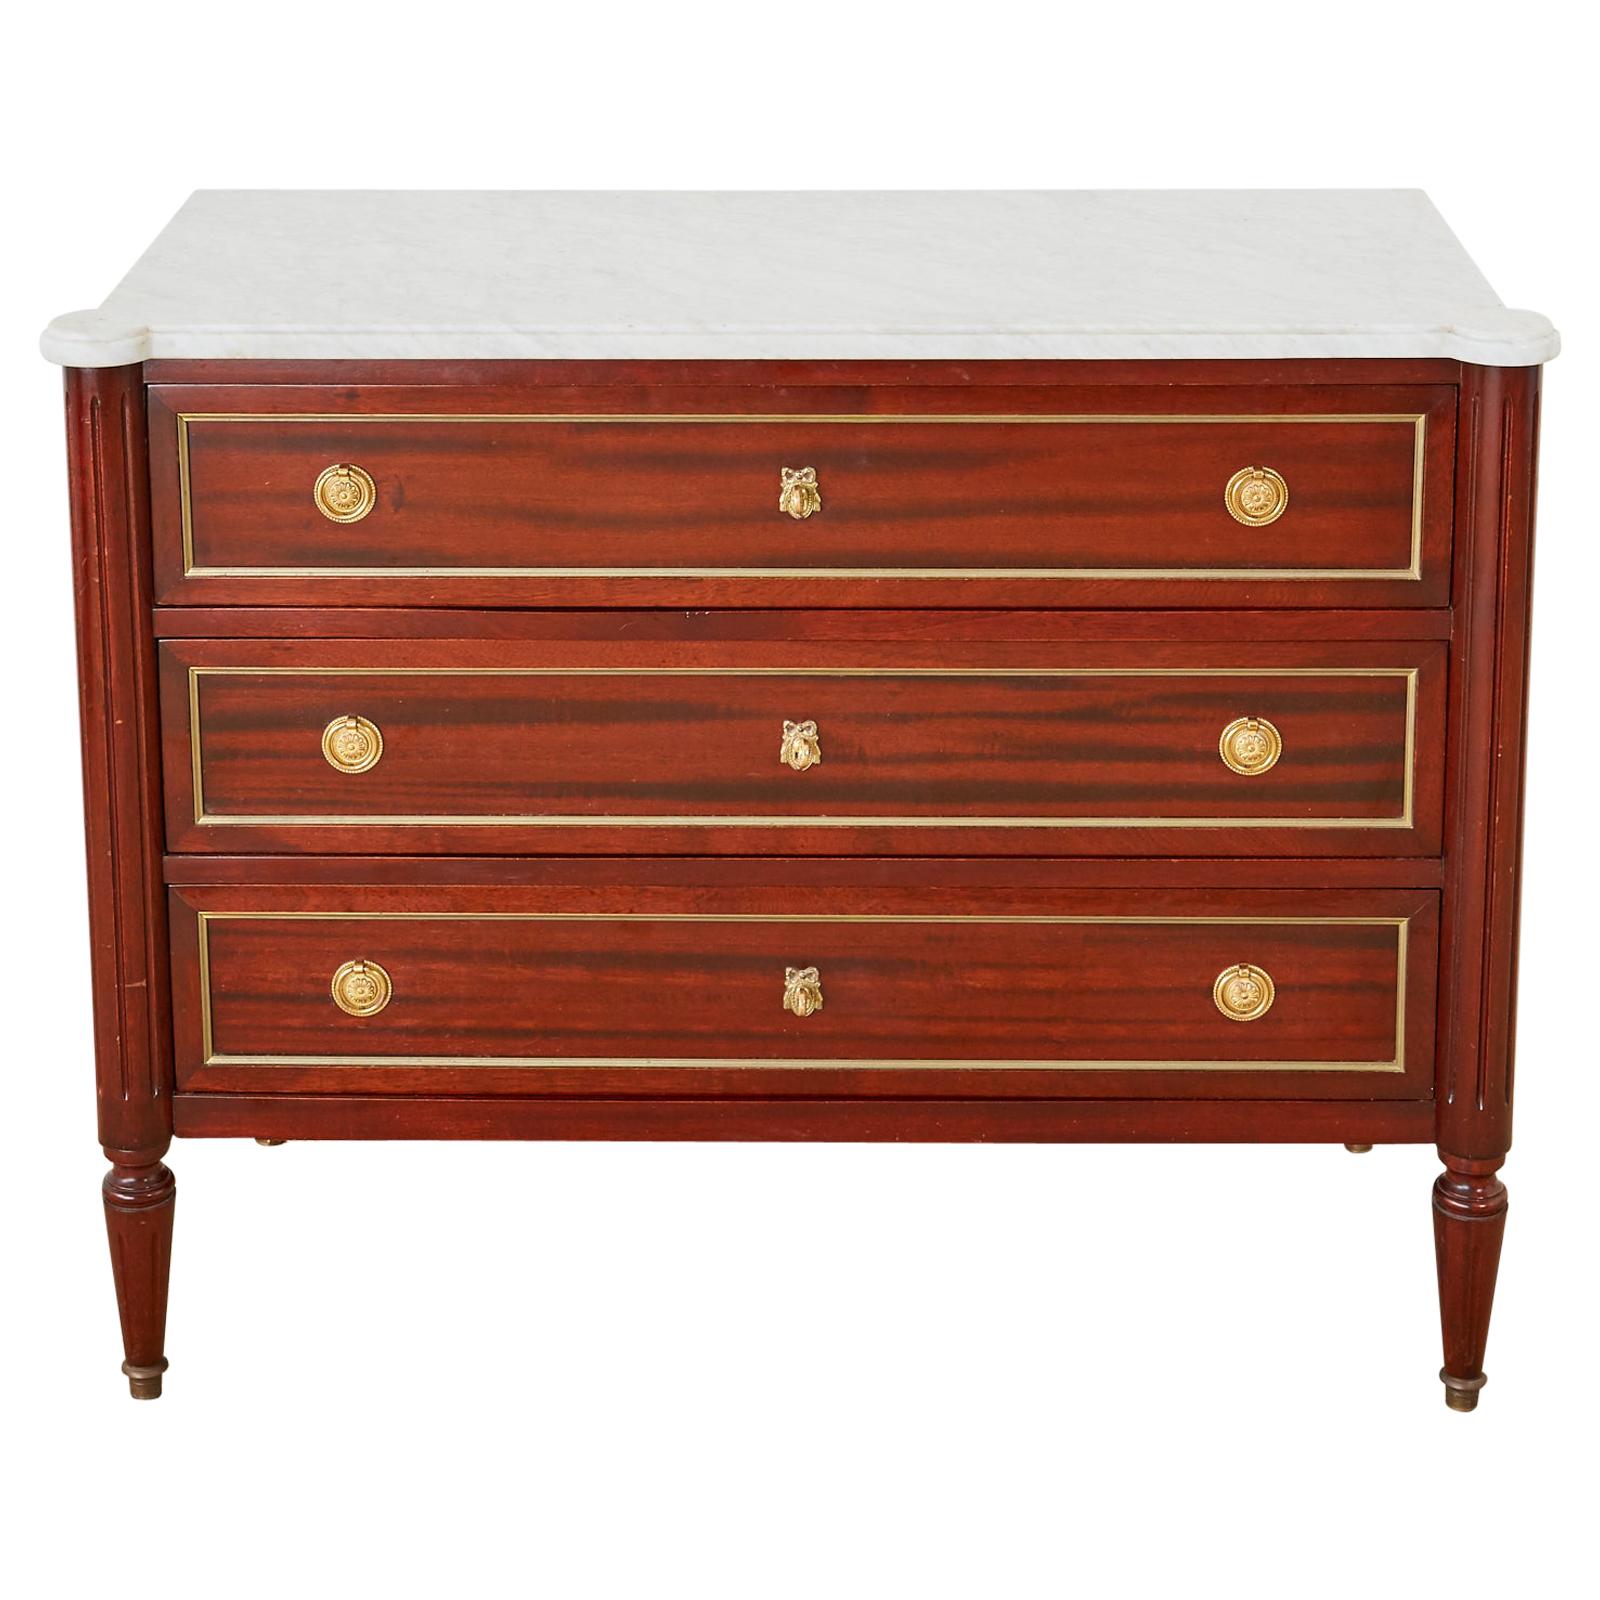 French Louis XVI Style Mahogany Marble-Top Commode Dresser 